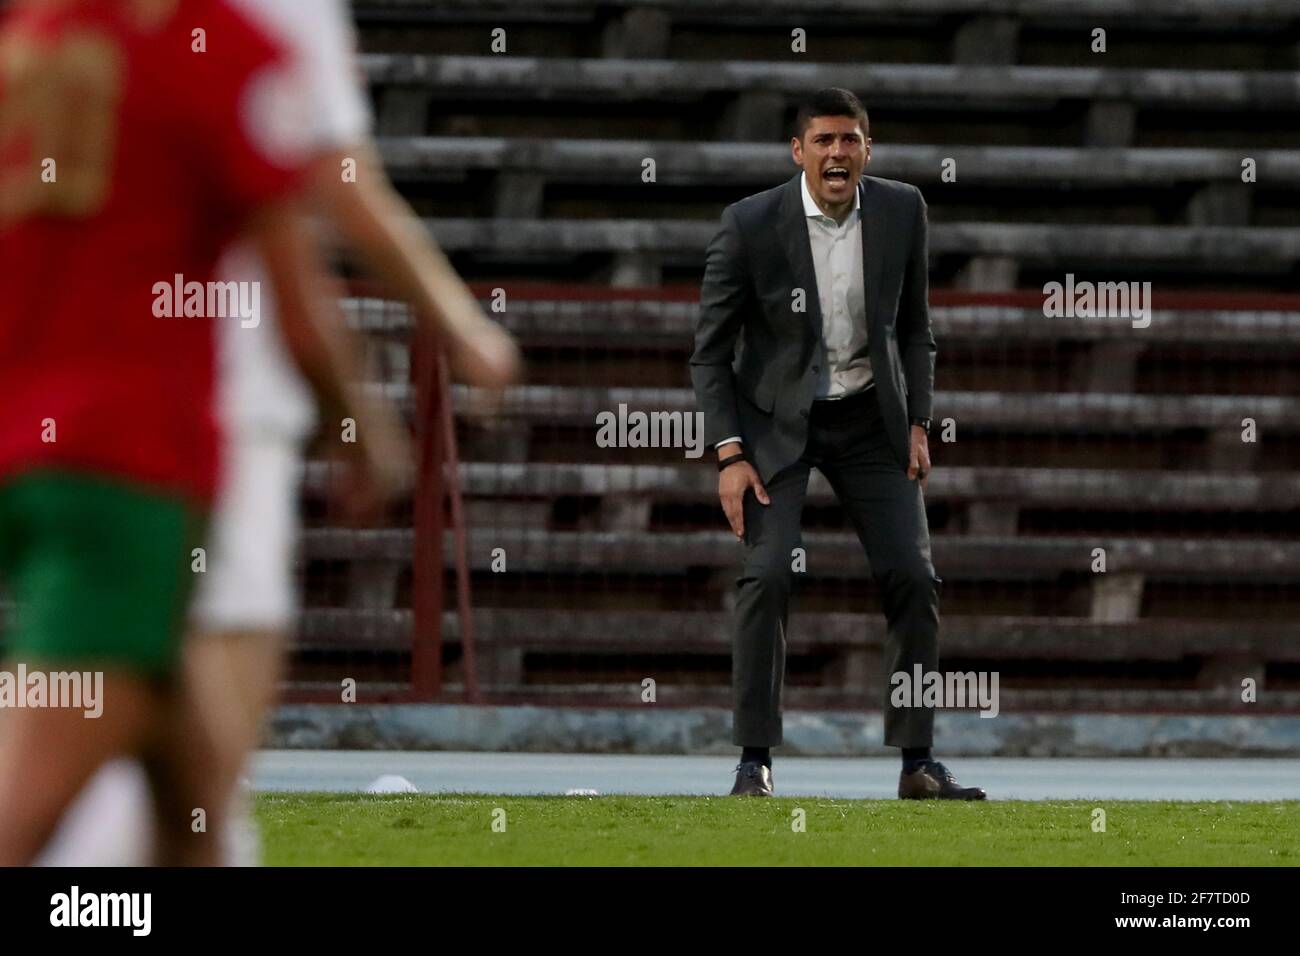 Lisbon, Portugal. 9th Apr, 2021. Portugal's head coach Francisco Neto reacts during the UEFA Women's EURO 2022 play-off first leg match between Portugal and Russia, at the Restelo stadium in Lisbon, Portugal, on April 9, 2021. Credit: Pedro Fiuza/ZUMA Wire/Alamy Live News Stock Photo